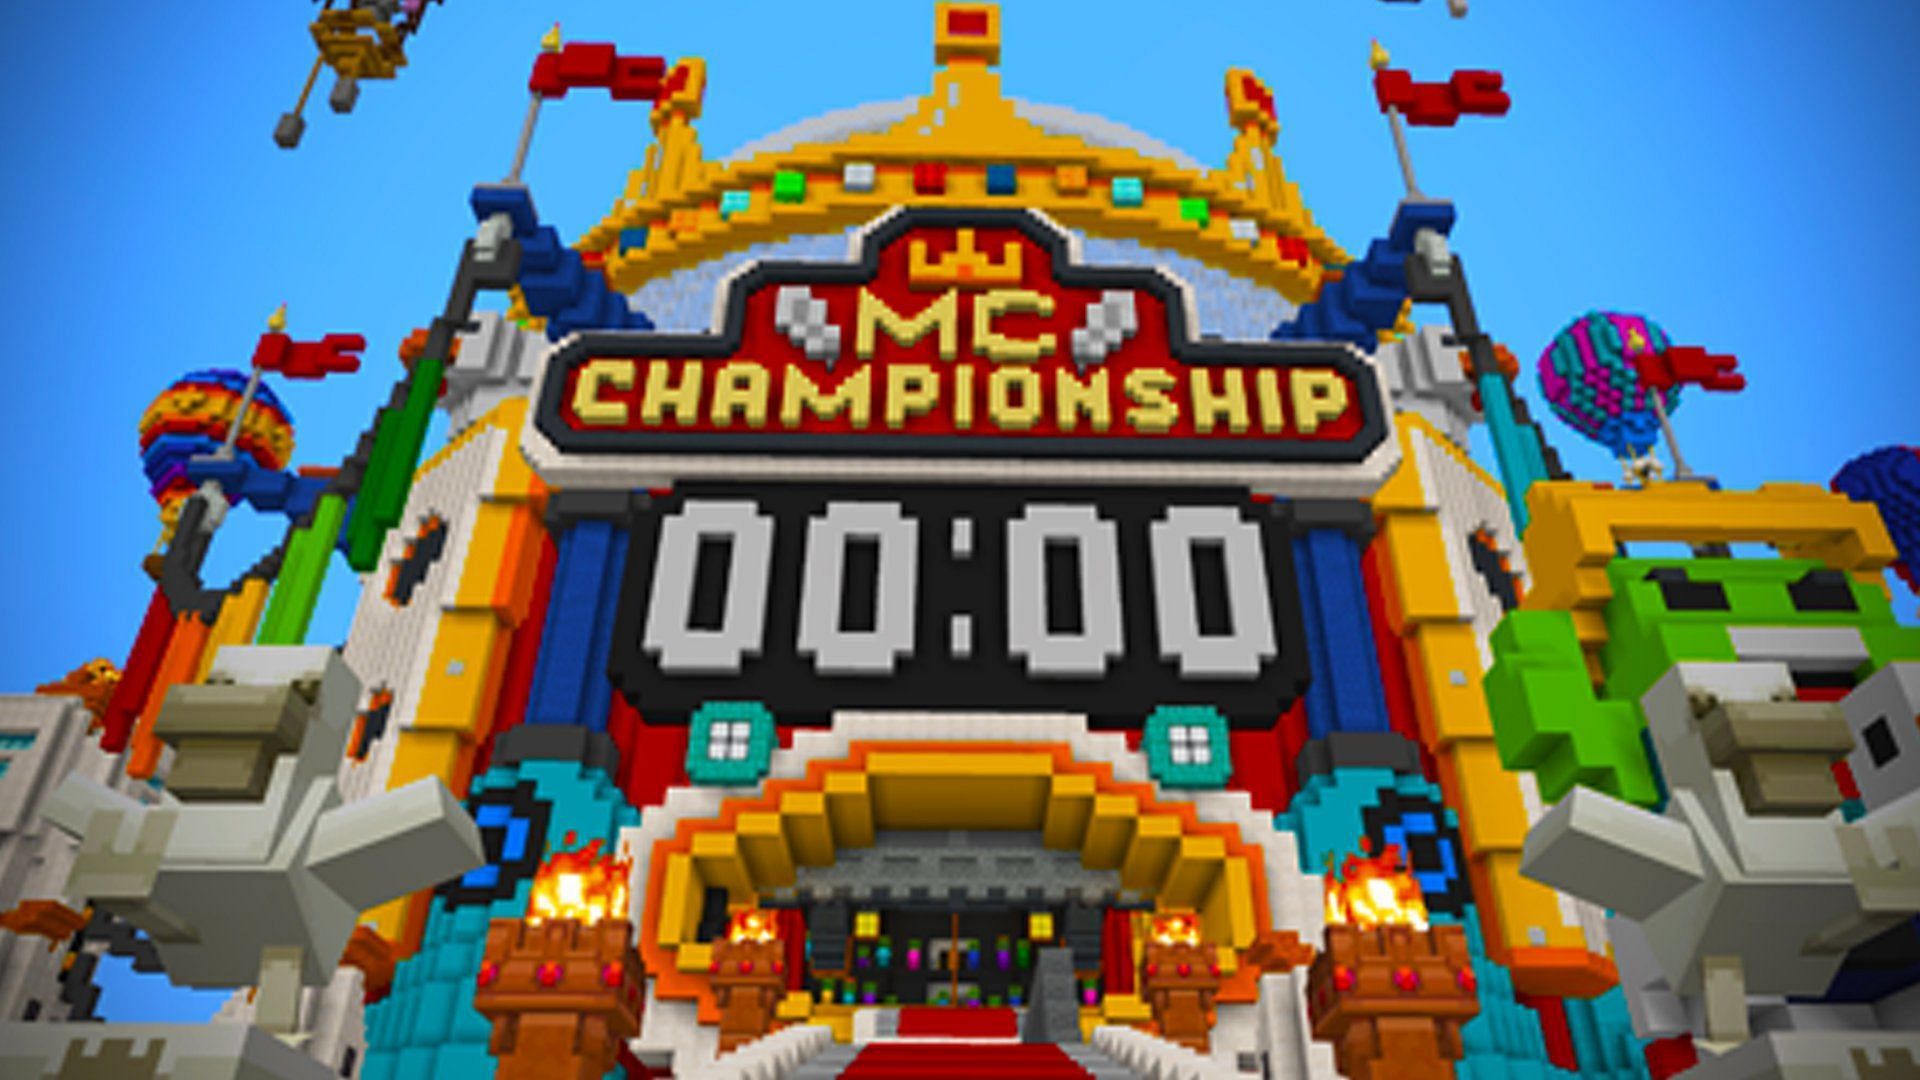 The Minecraft Championships have undergone many changes over the years (Image via MCChampionships_ on Twitter)